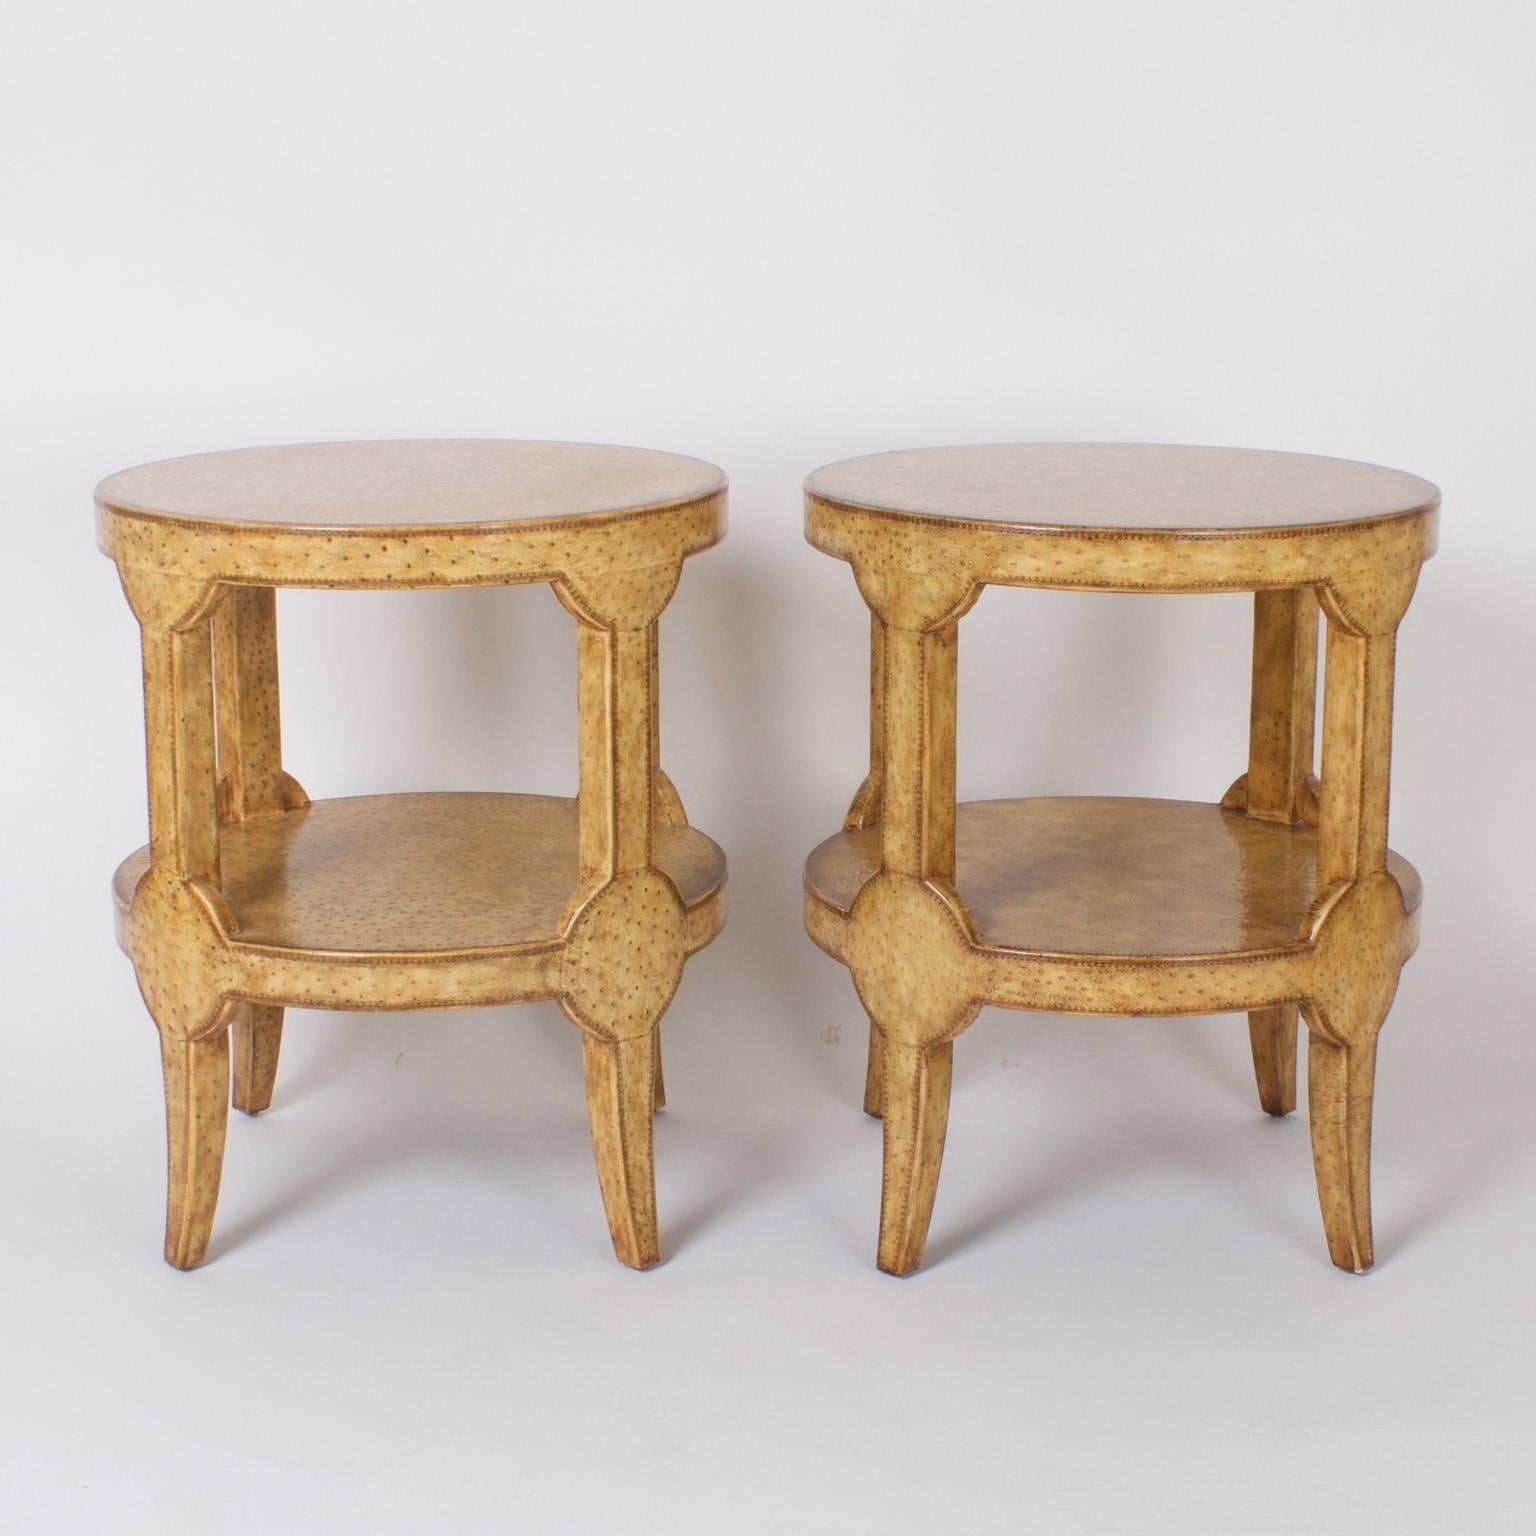 Chic pair of mid century Maitland Smith two tiered end tables or stands entirely covered in faux ostrich skin. The form is a modern stylized interpretation of directoire. Can be used with or without glass tops.